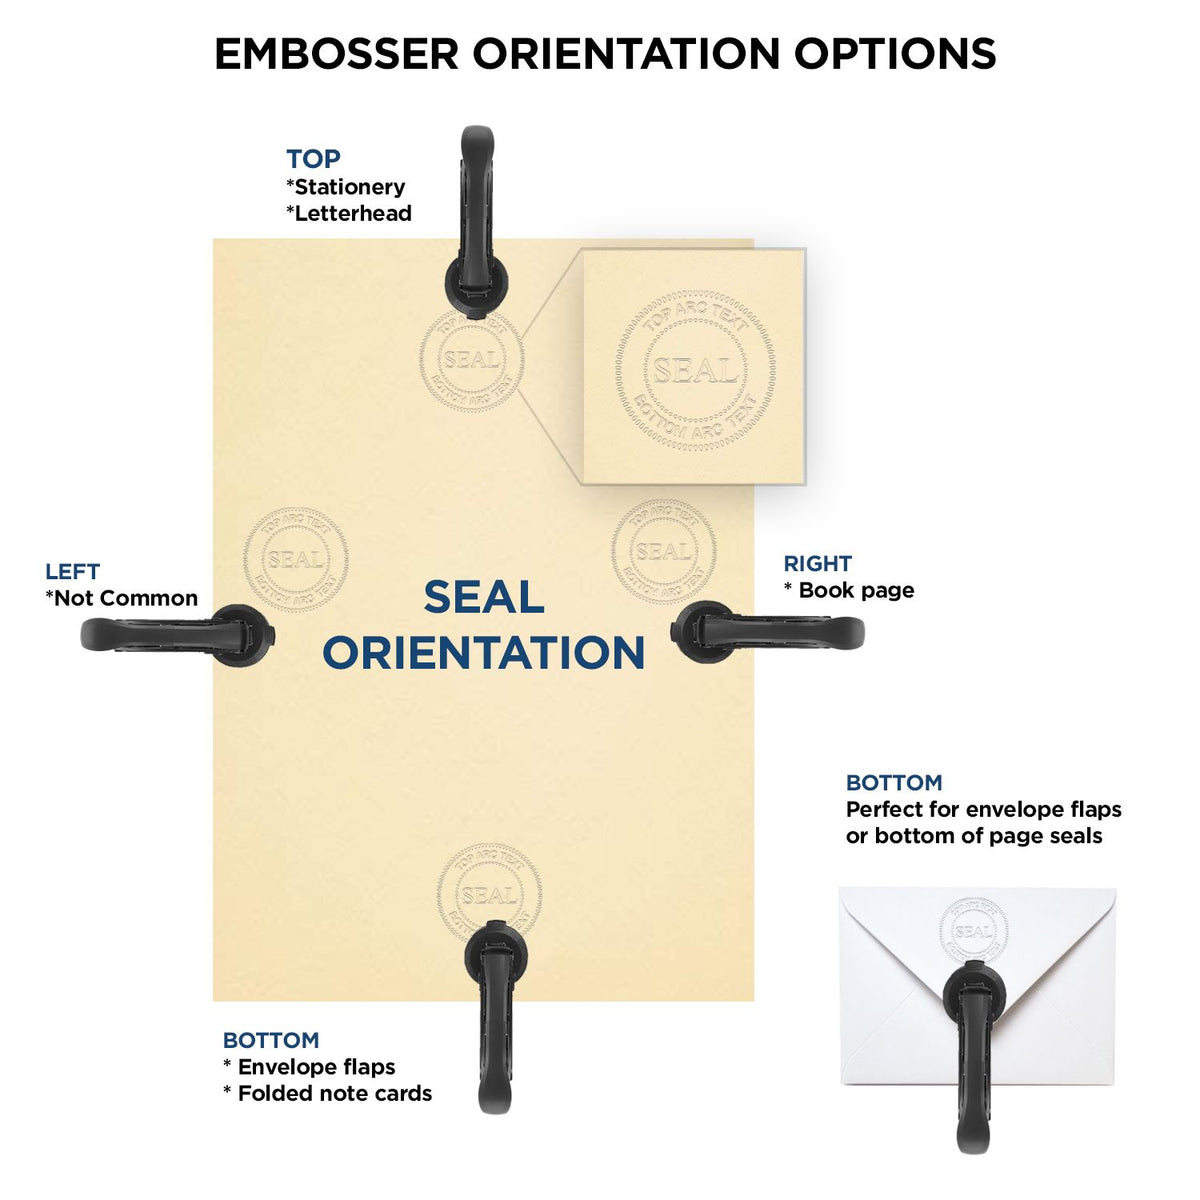 An infographic for the Heavy Duty Cast Iron Iowa Engineer Seal Embosser showing embosser orientation, this is showing examples of a top, bottom, right and left insert.